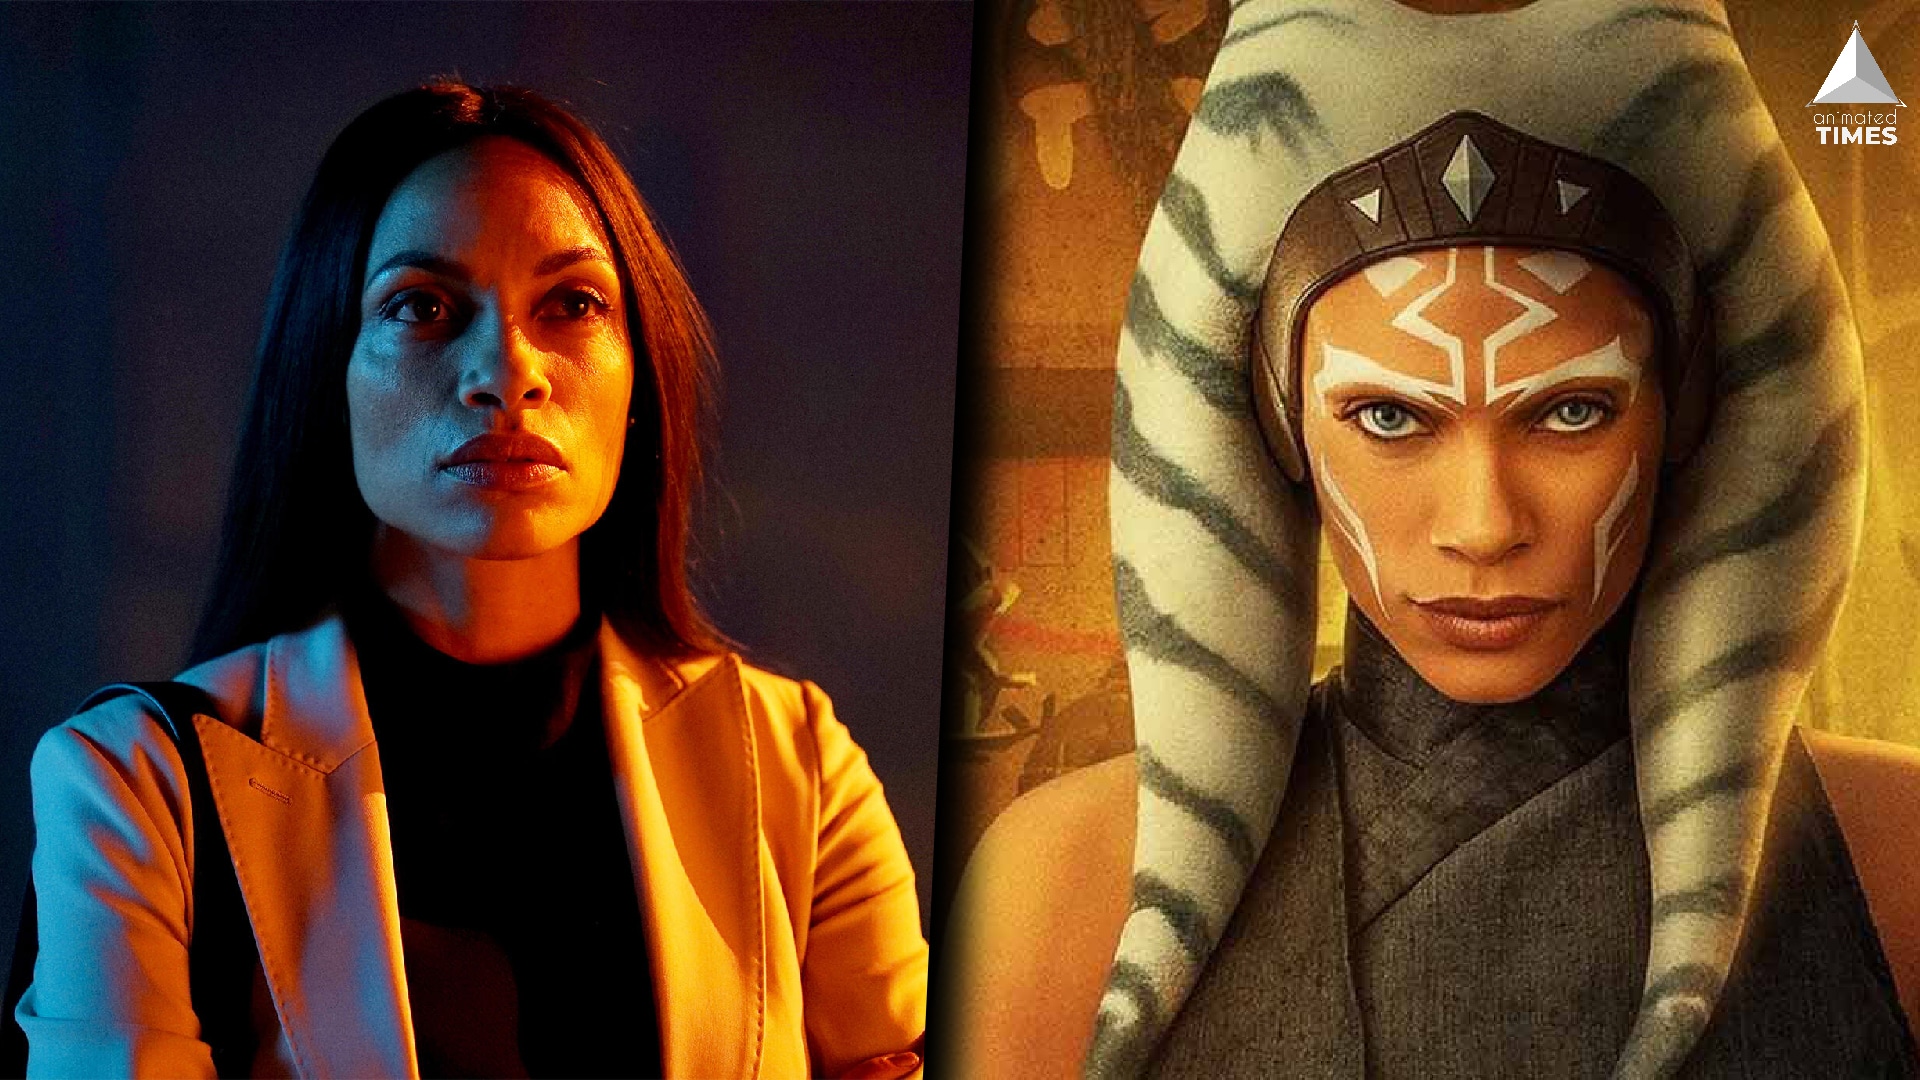 The Mandalorian: Rosario Dawson Credits The Force For Her Casting.